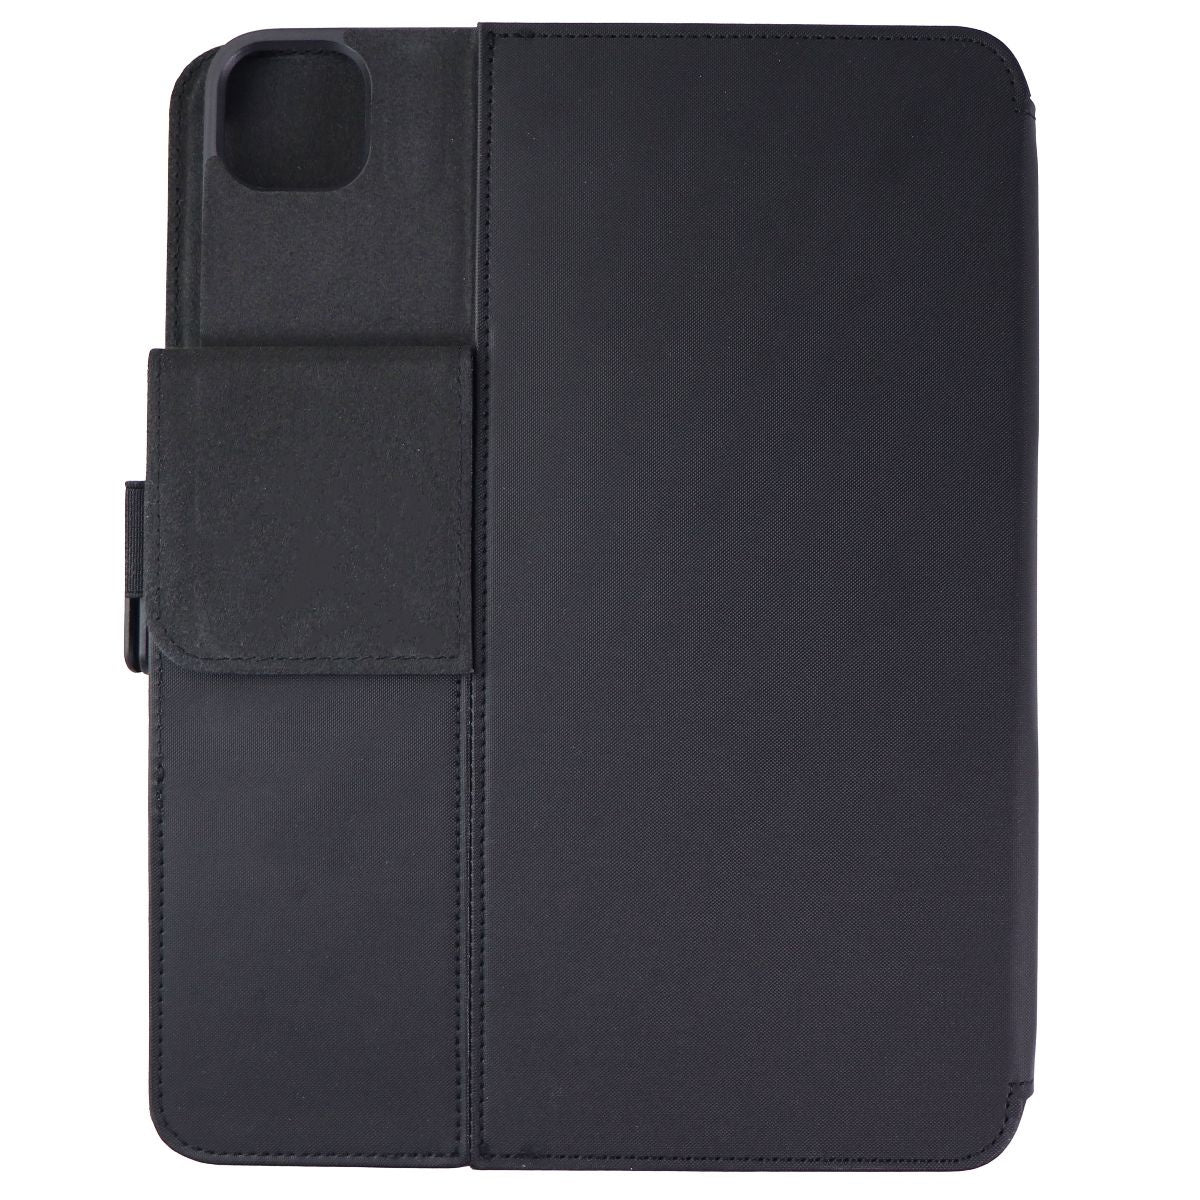 Speck Balance Folio Case for Apple iPad Pro 11-Inch (2nd & 1st Gen) - Black iPad/Tablet Accessories - Cases, Covers, Keyboard Folios Speck    - Simple Cell Bulk Wholesale Pricing - USA Seller